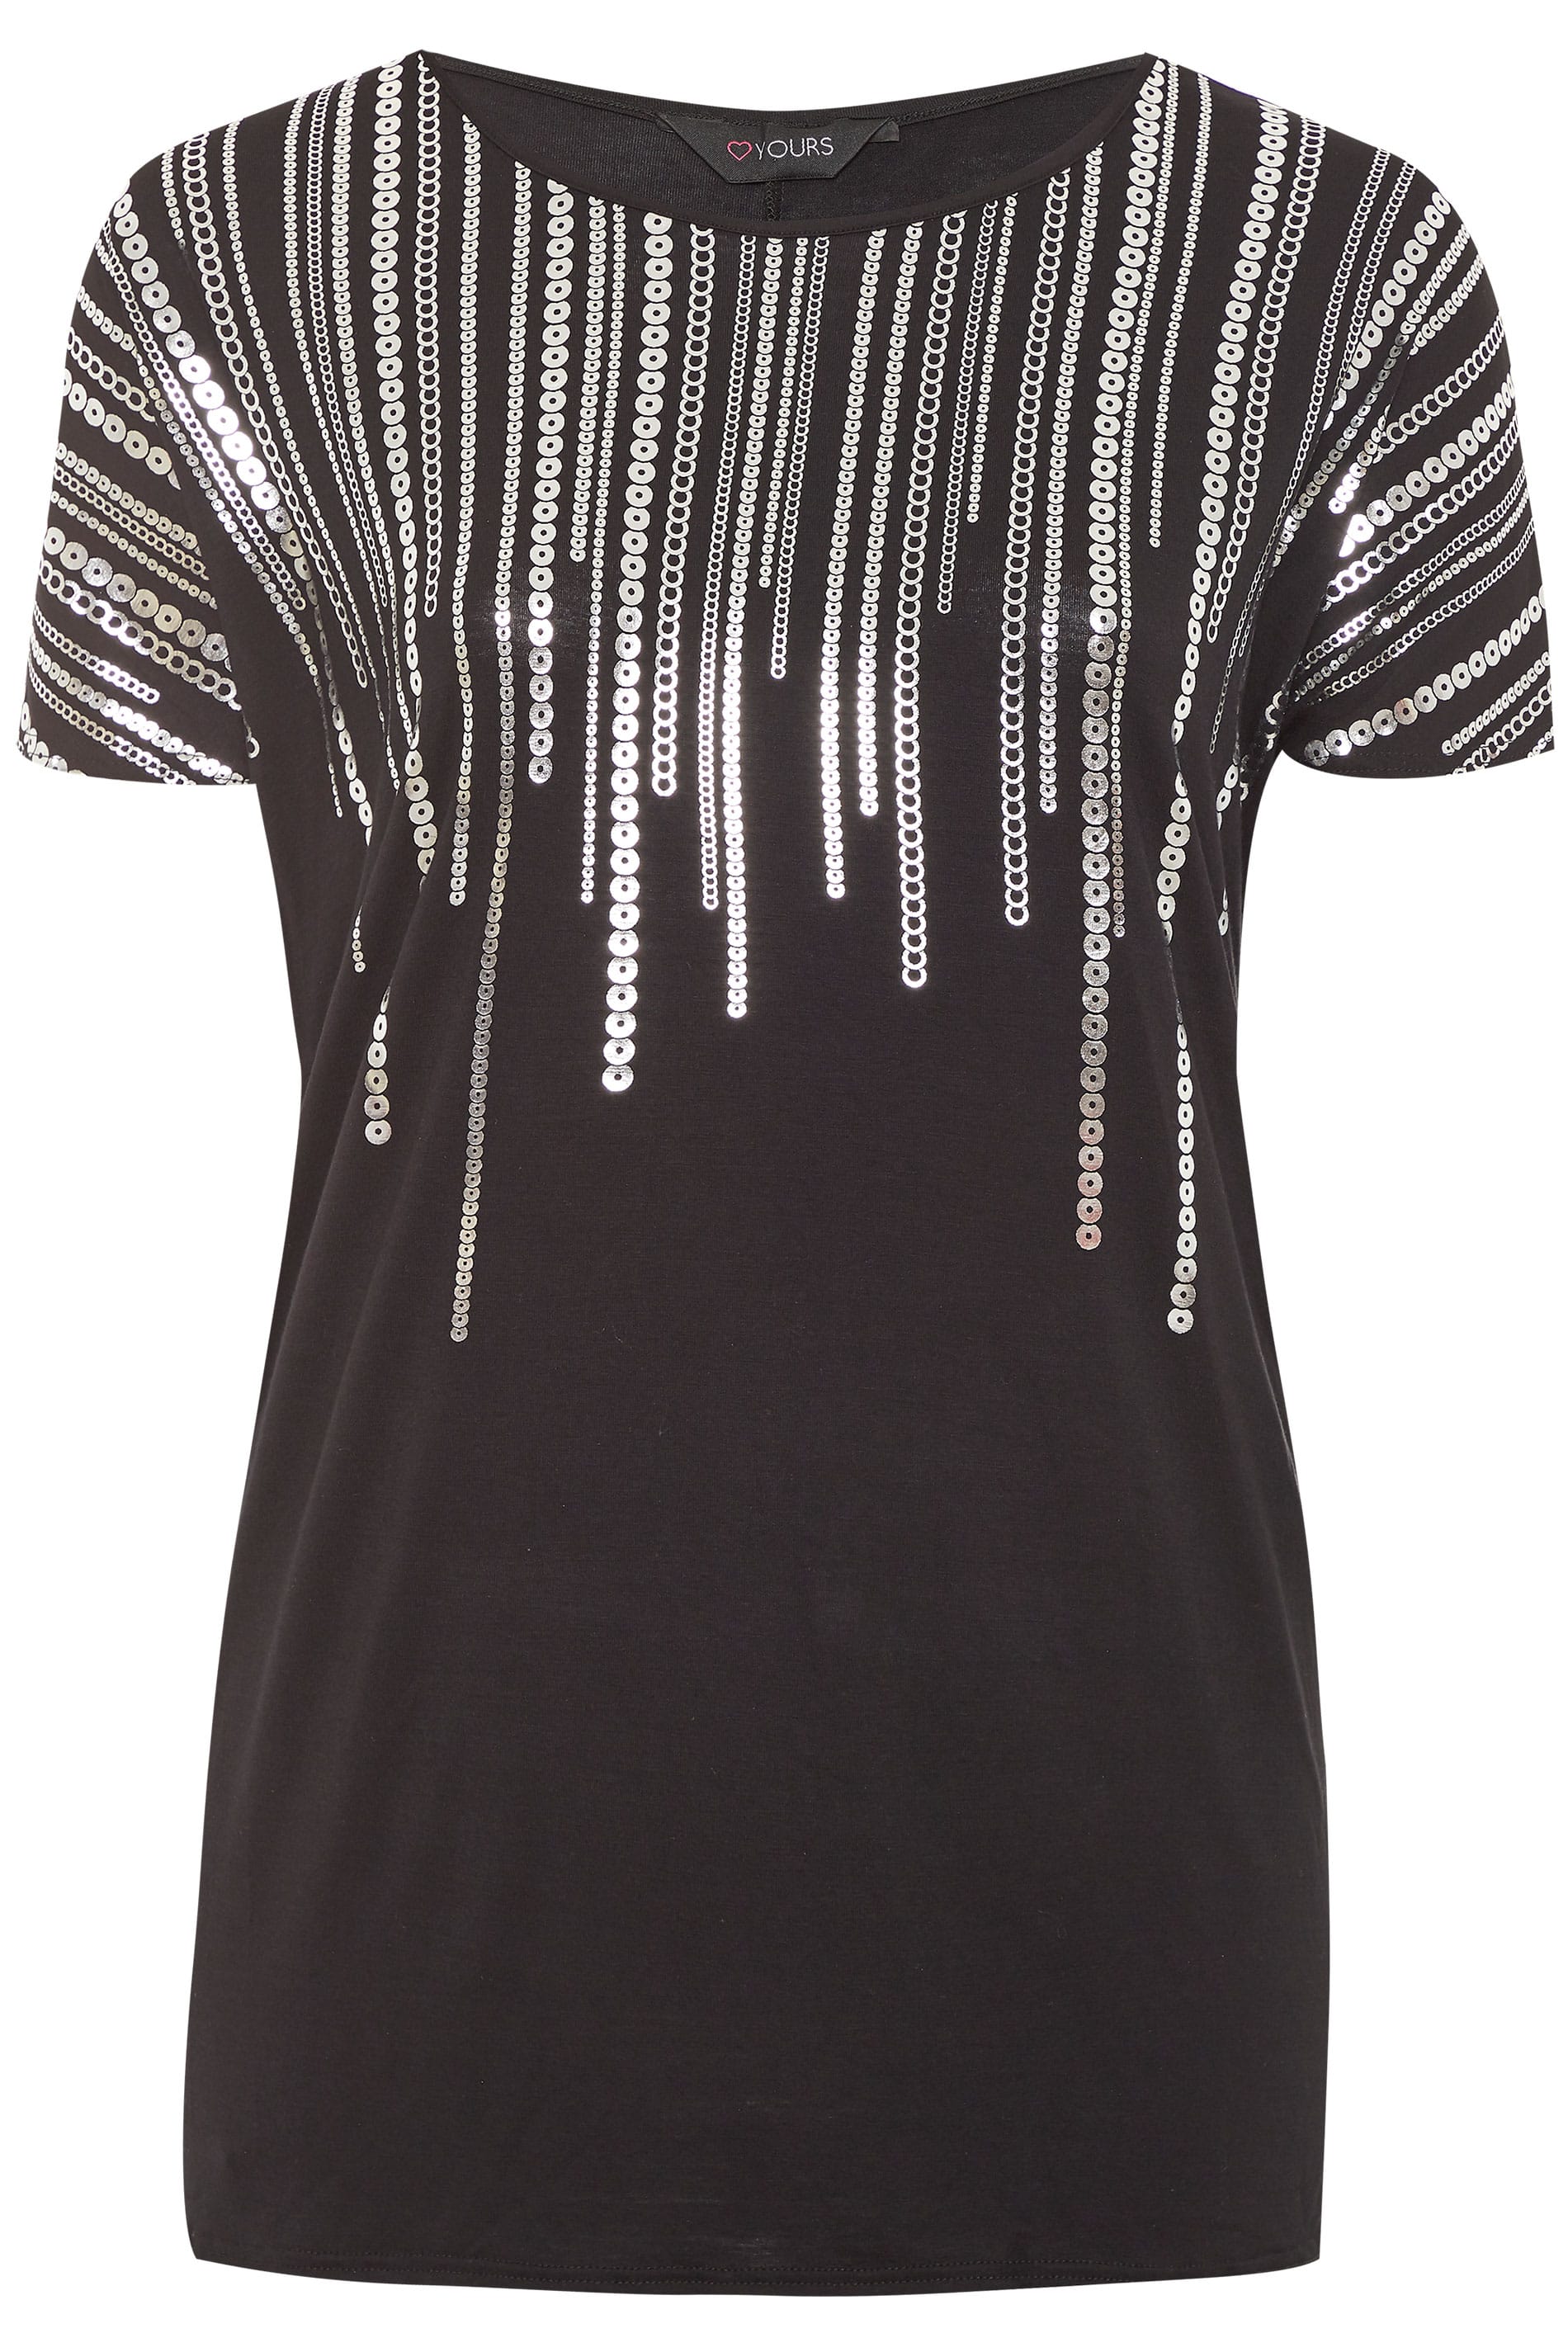 Black Foil Chain Print Top | Yours Clothing